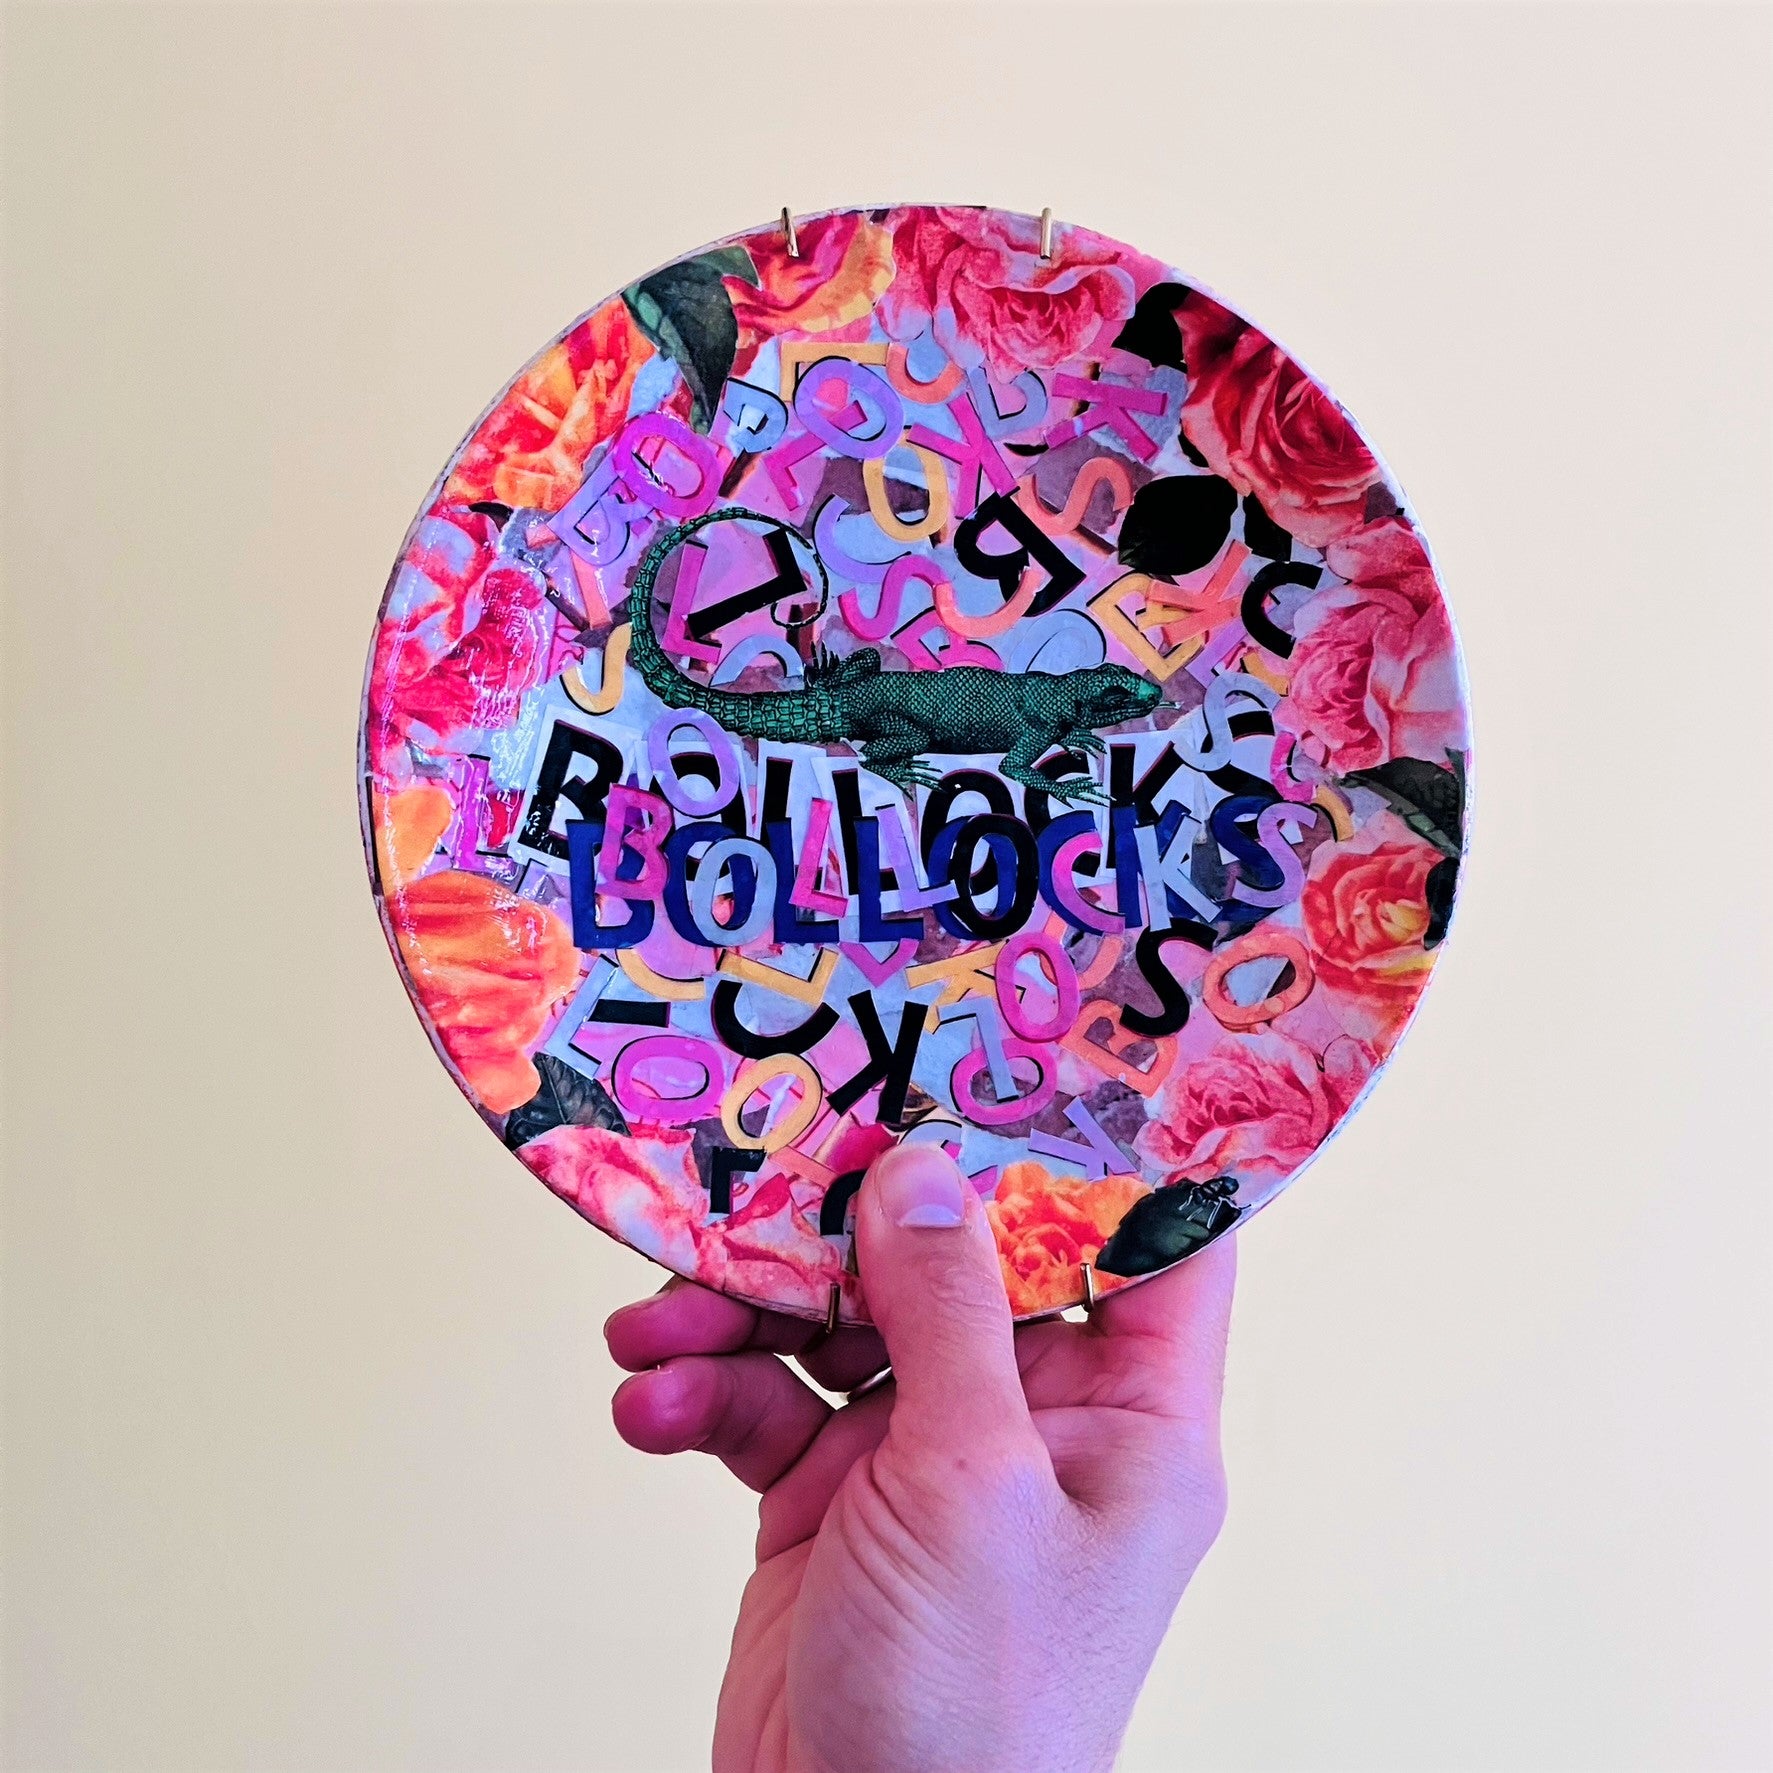 "Bollocks" Wall Plate by House of Frisson, featuring a collage of colourful letters forming the word "bollocks", and a lizard, framed by roses. Holding the plate.